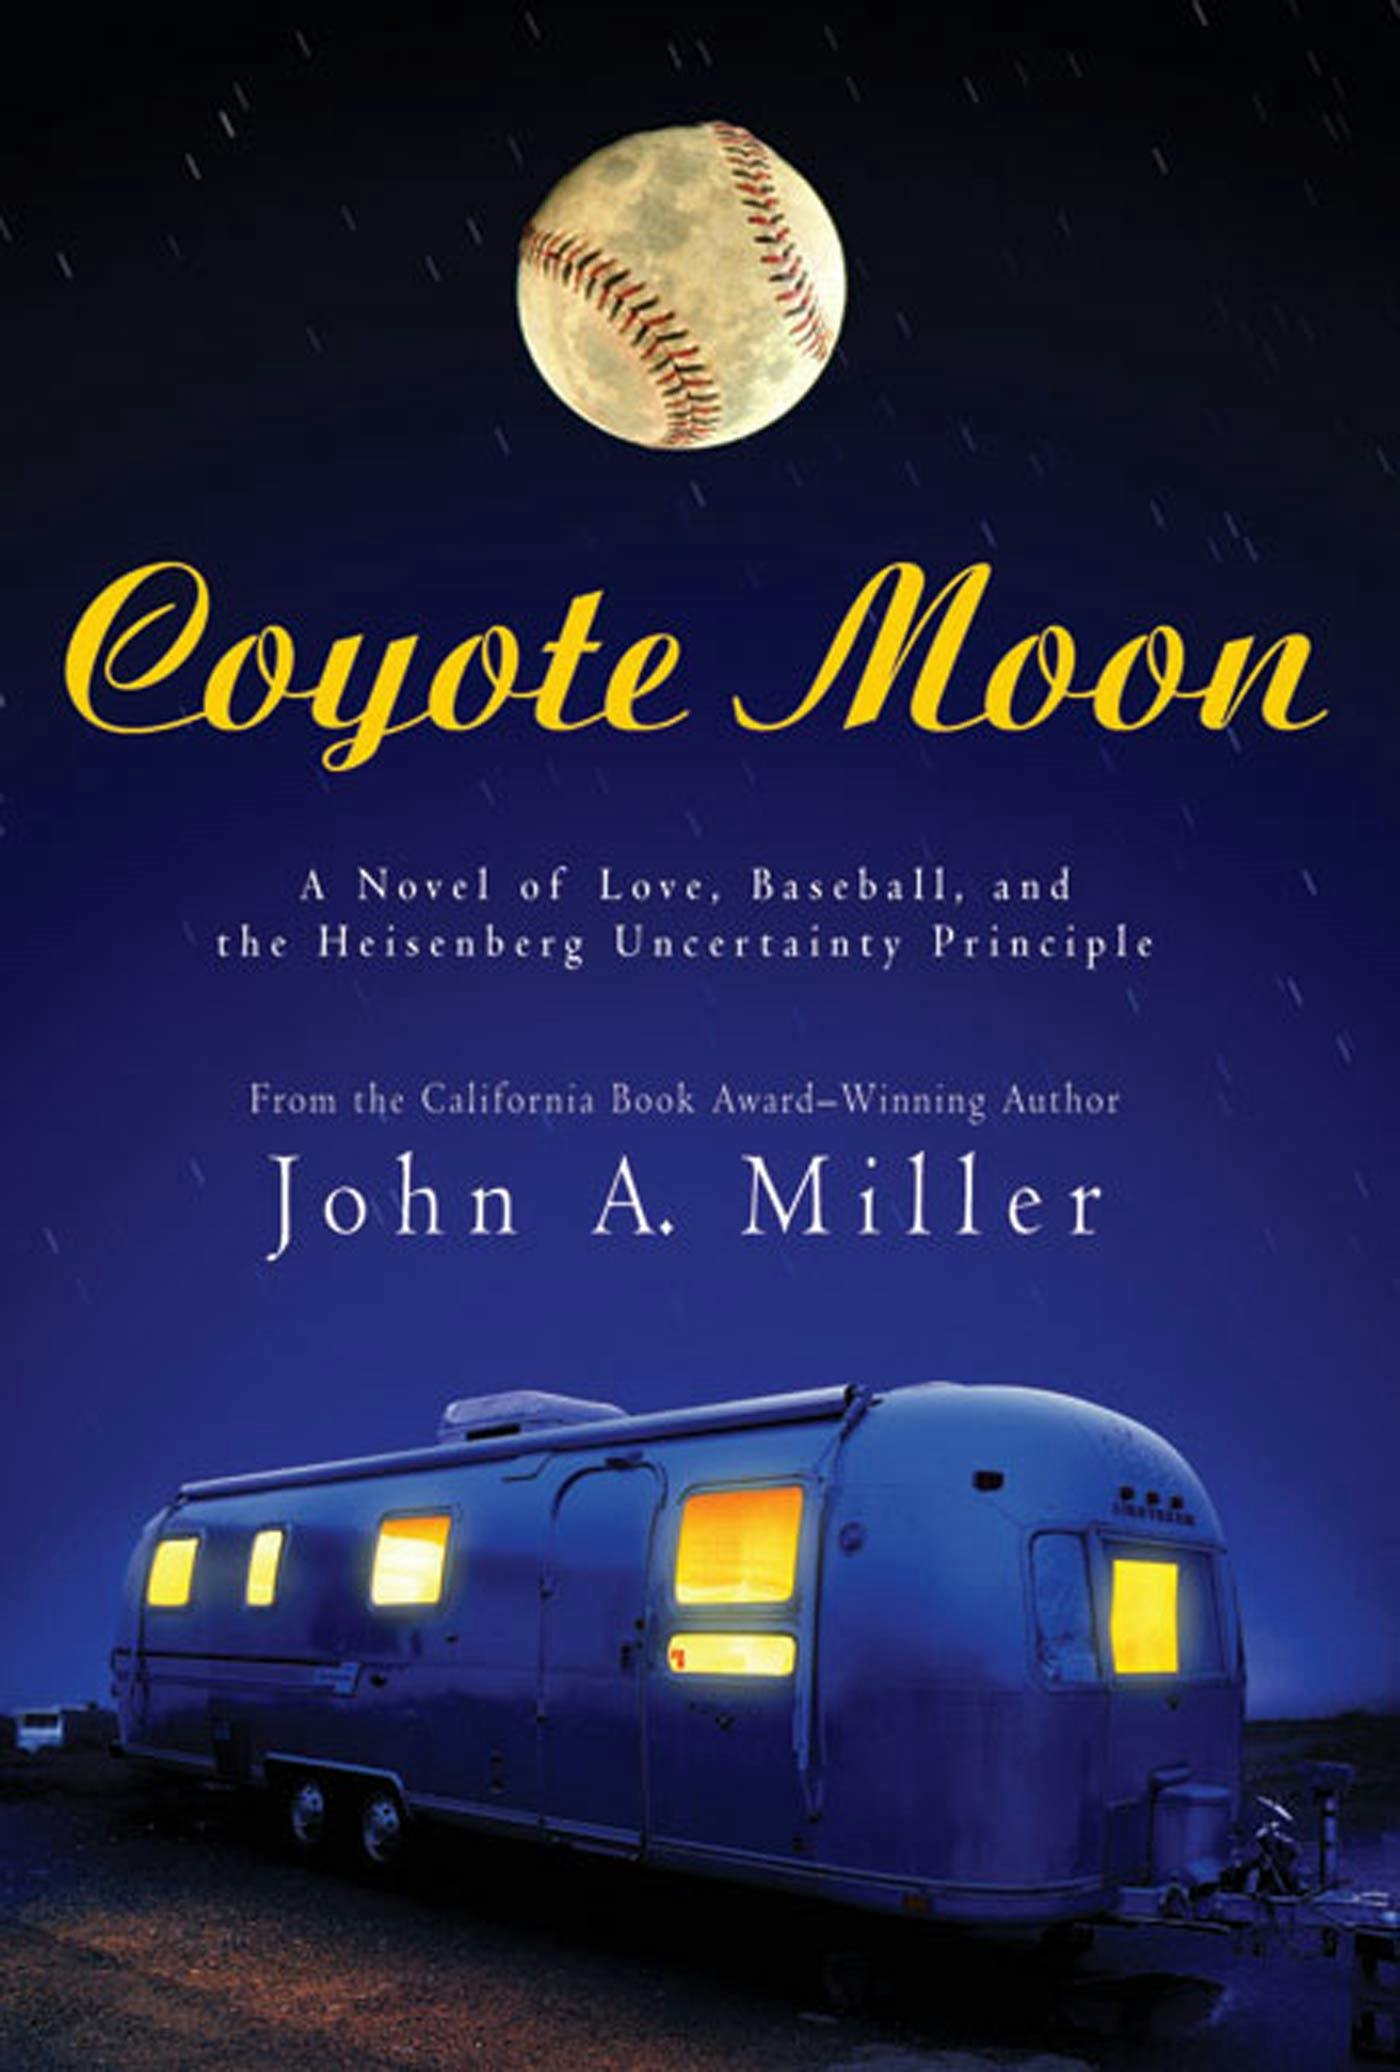 Cover for the book titled as: Coyote Moon